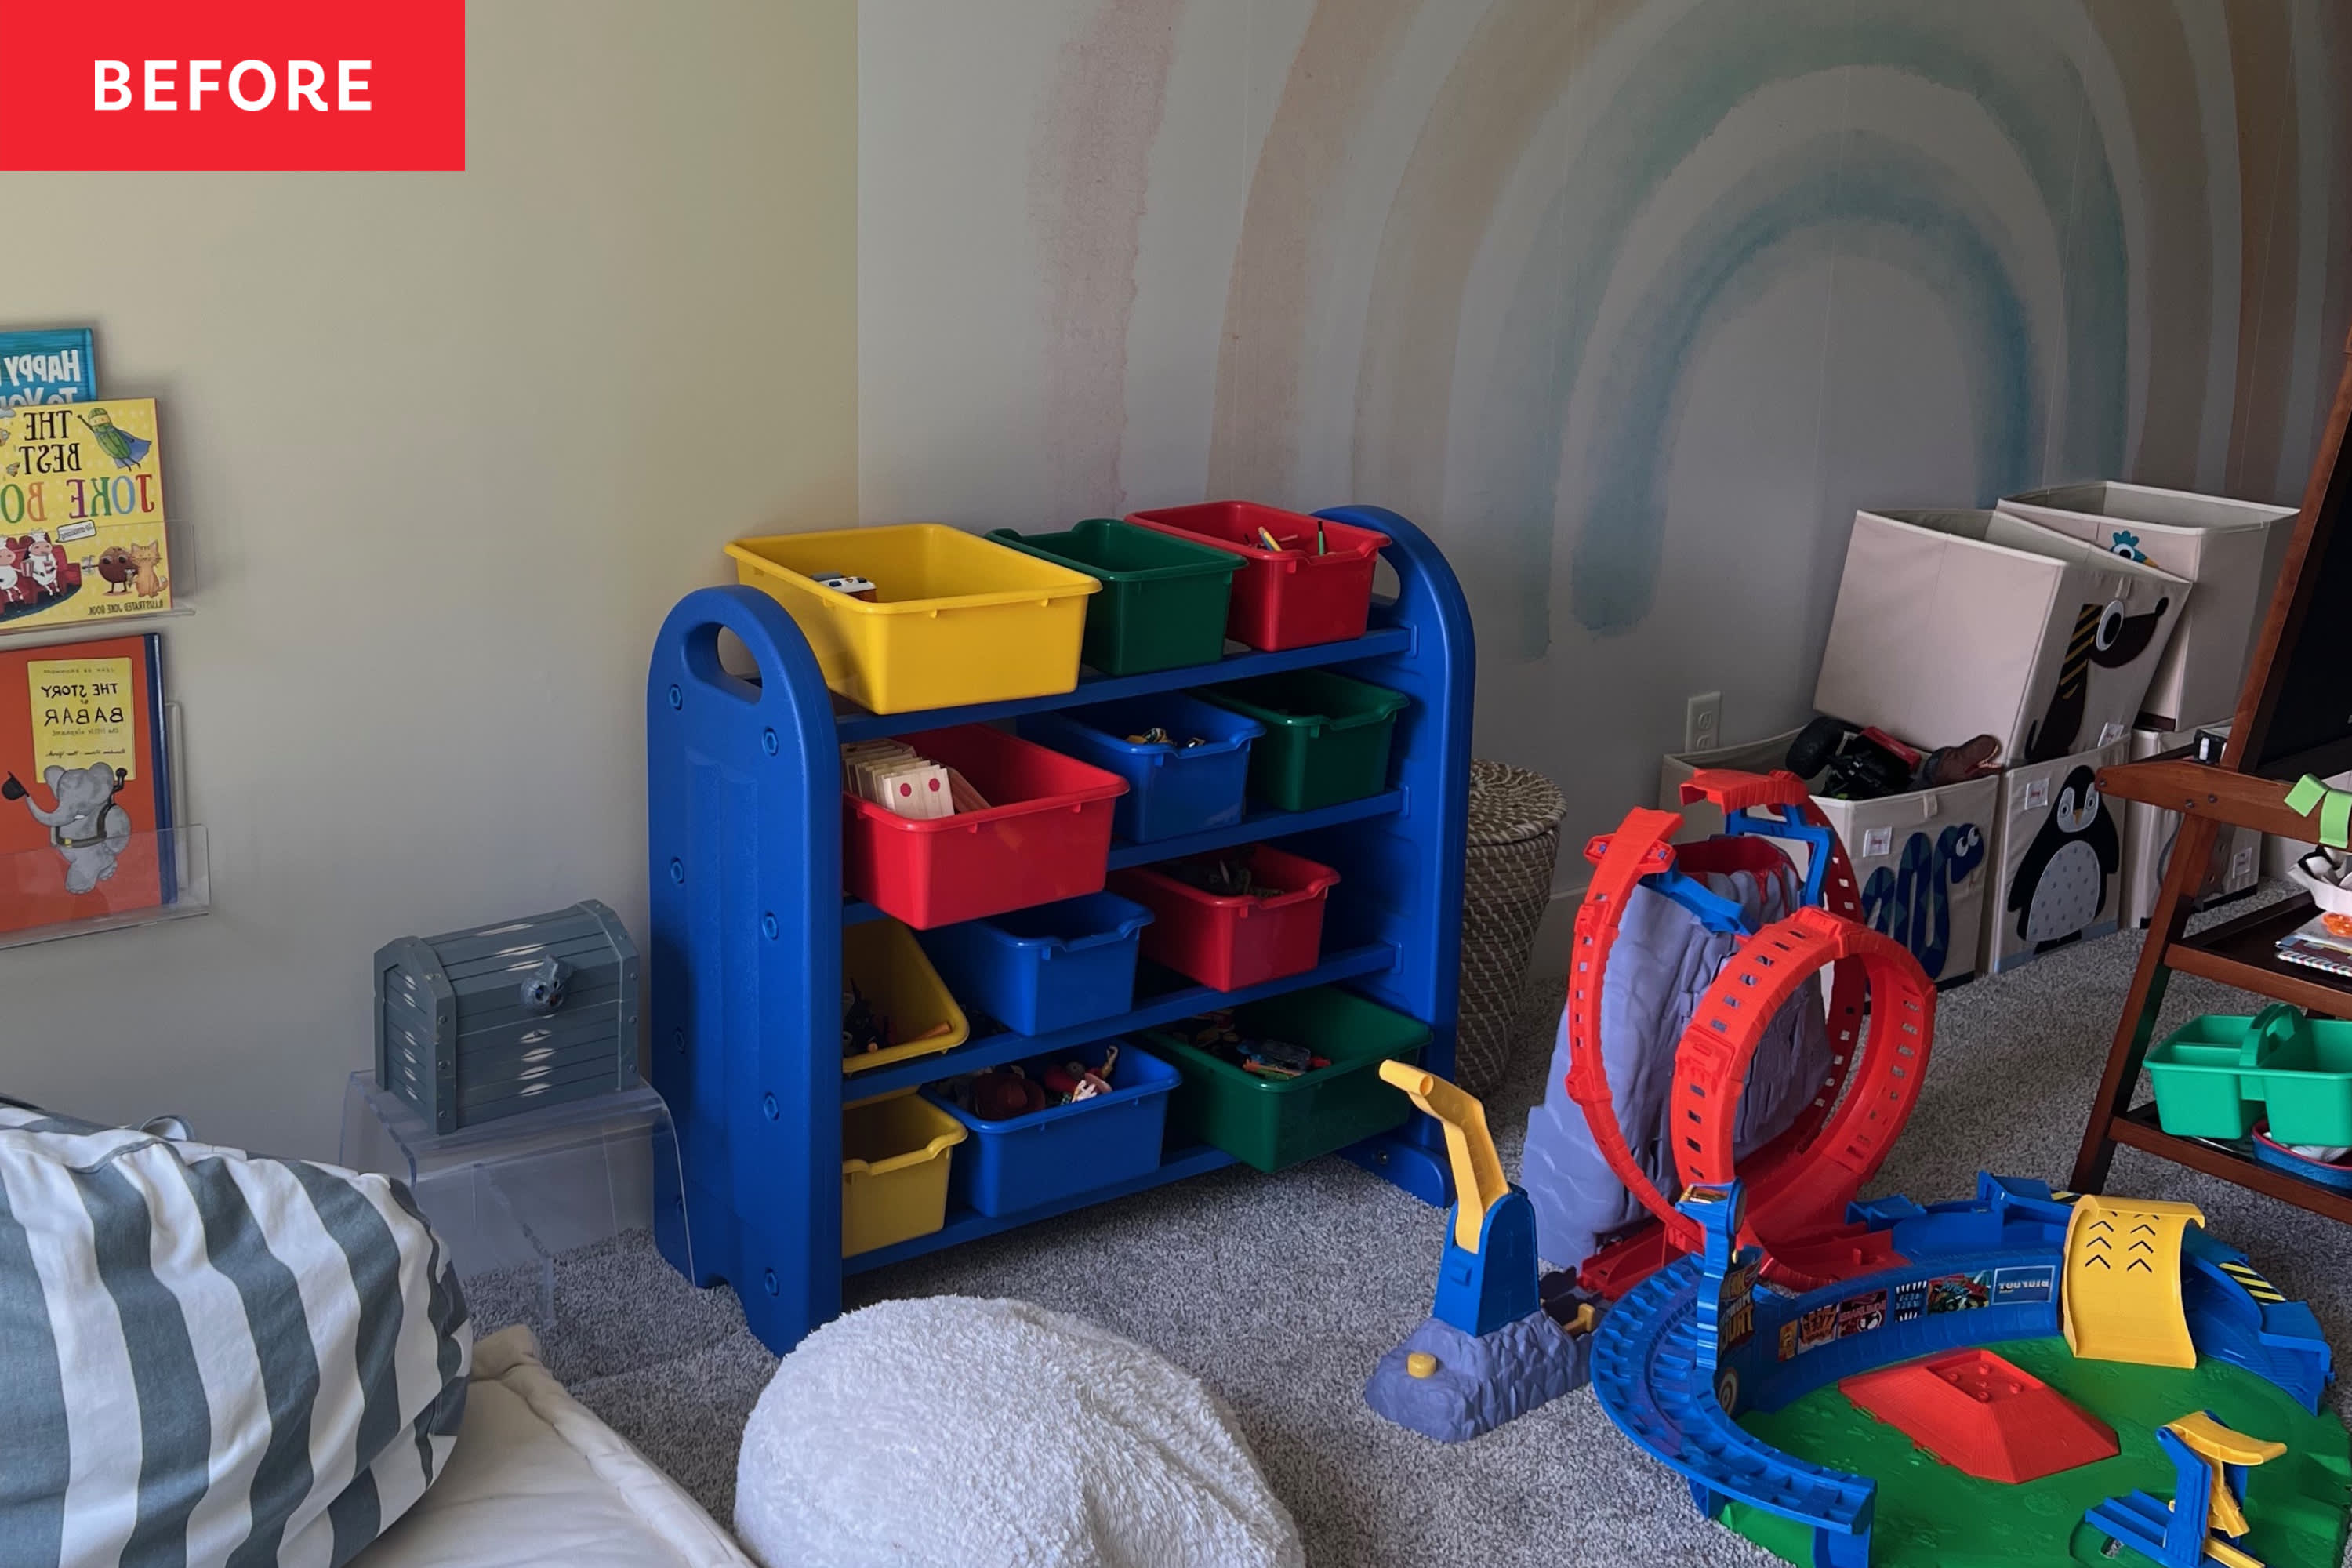 10 Types of Toy Organizers for Kids Bedrooms and Playrooms